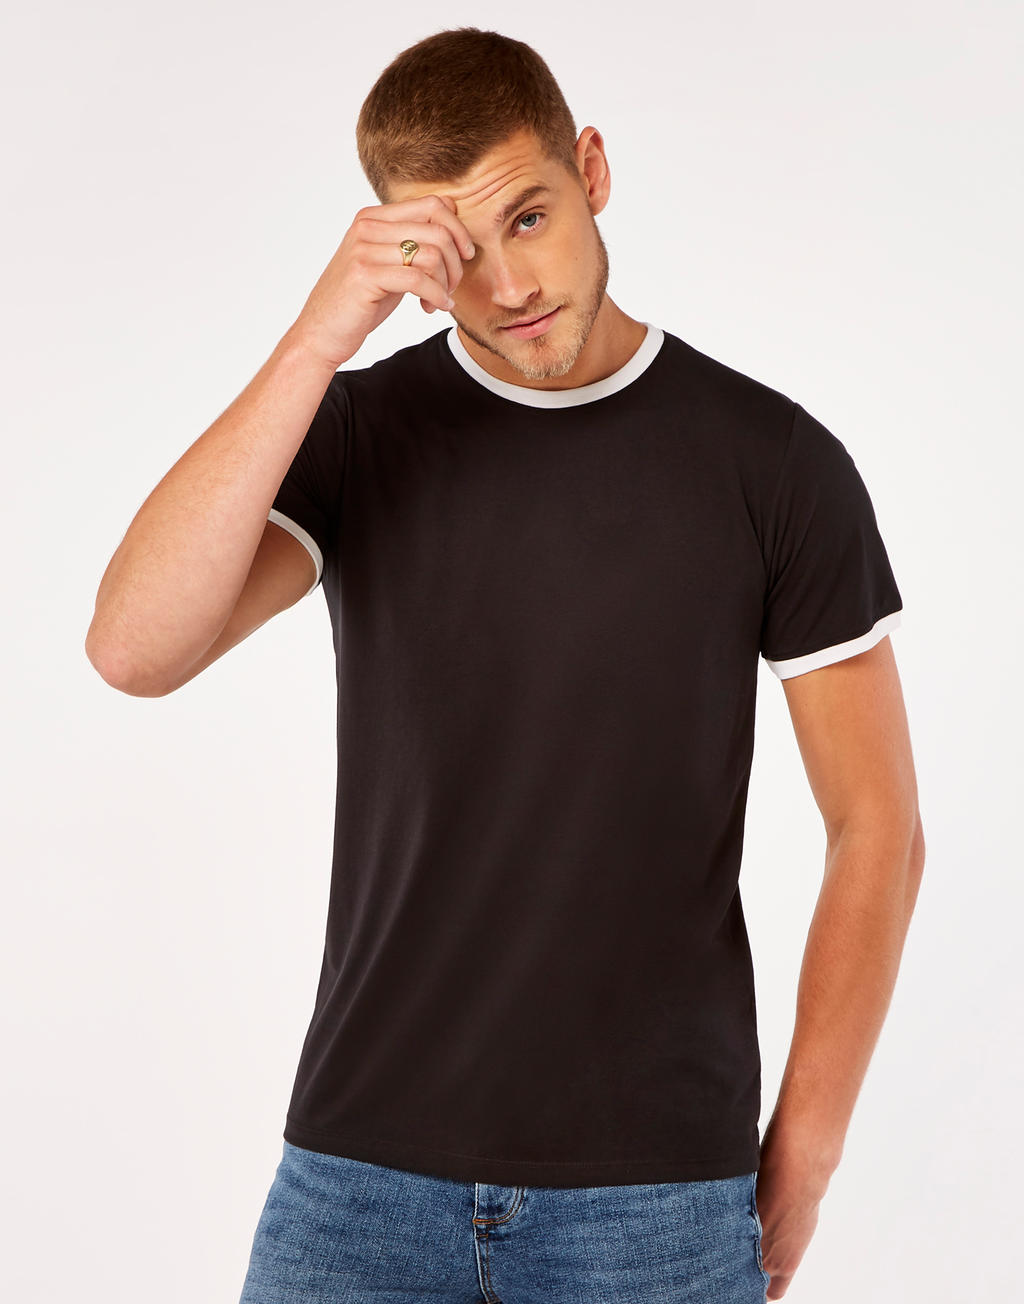  Fashion Fit Ringer Tee in Farbe White/Black